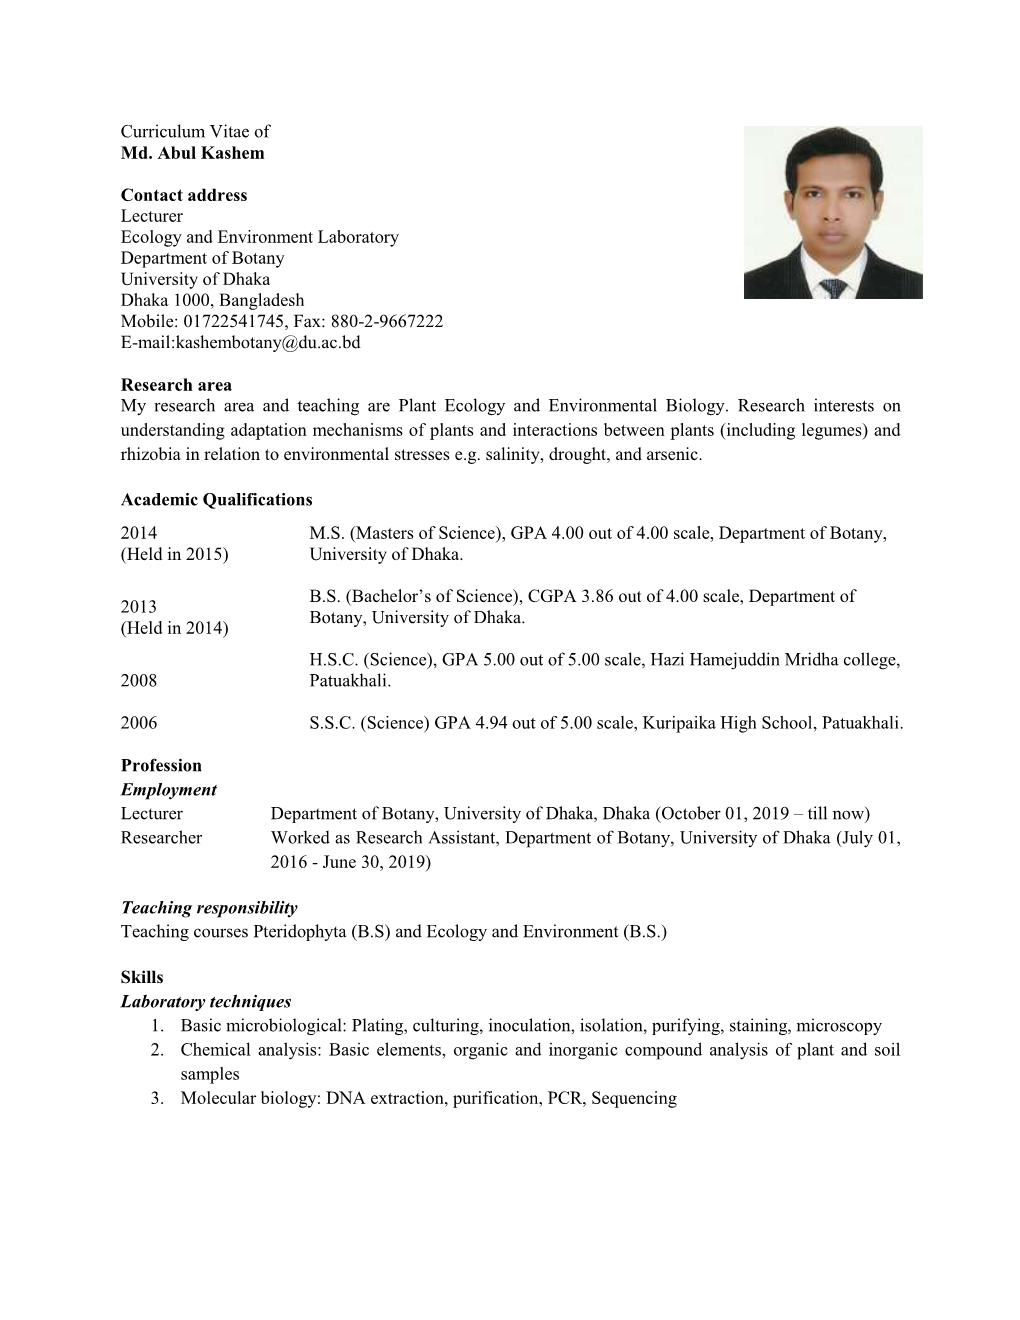 Curriculum Vitae of Md. Abul Kashem Contact Address Lecturer Ecology and Environment Laboratory Department of Botany University